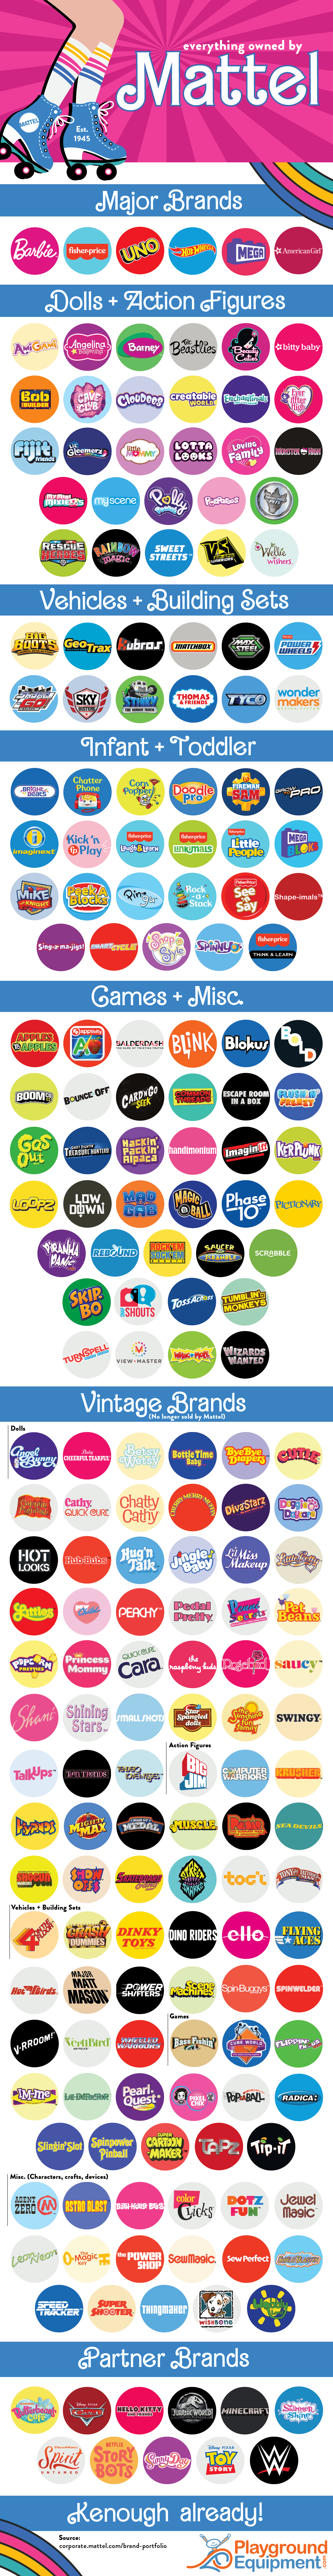 Everything Owned by Mattel - Infographic